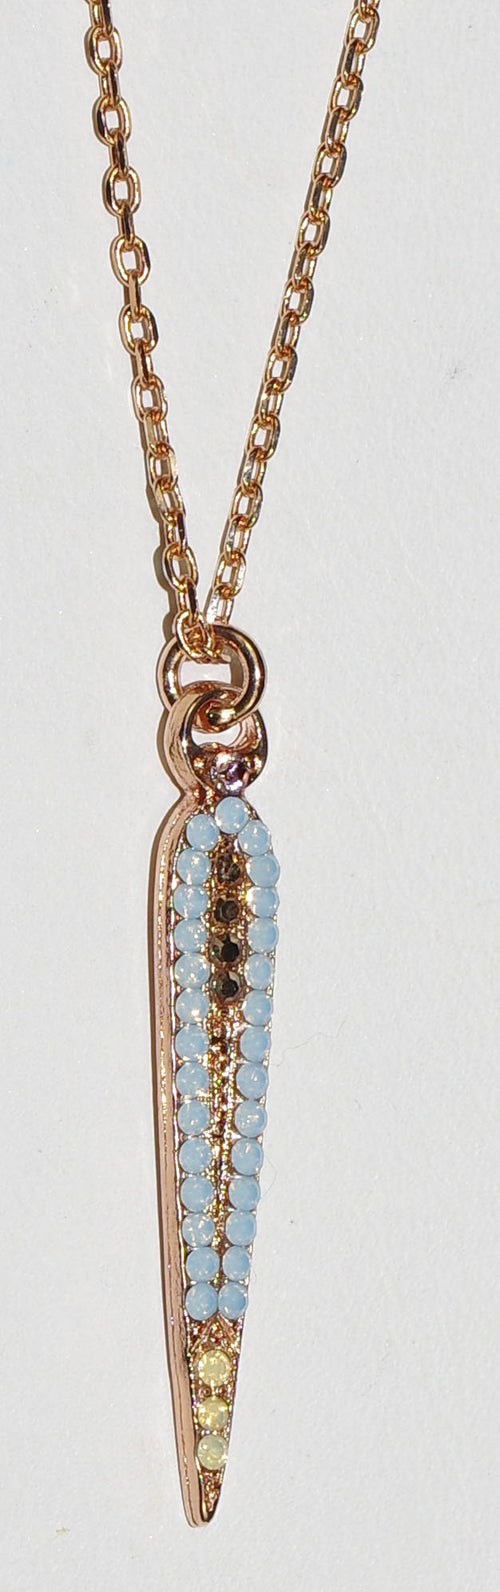 MARIANA PENDANT RHAPSODE: blue, yellow stones in 1.25" rose gold setting, 18" adjustable chain